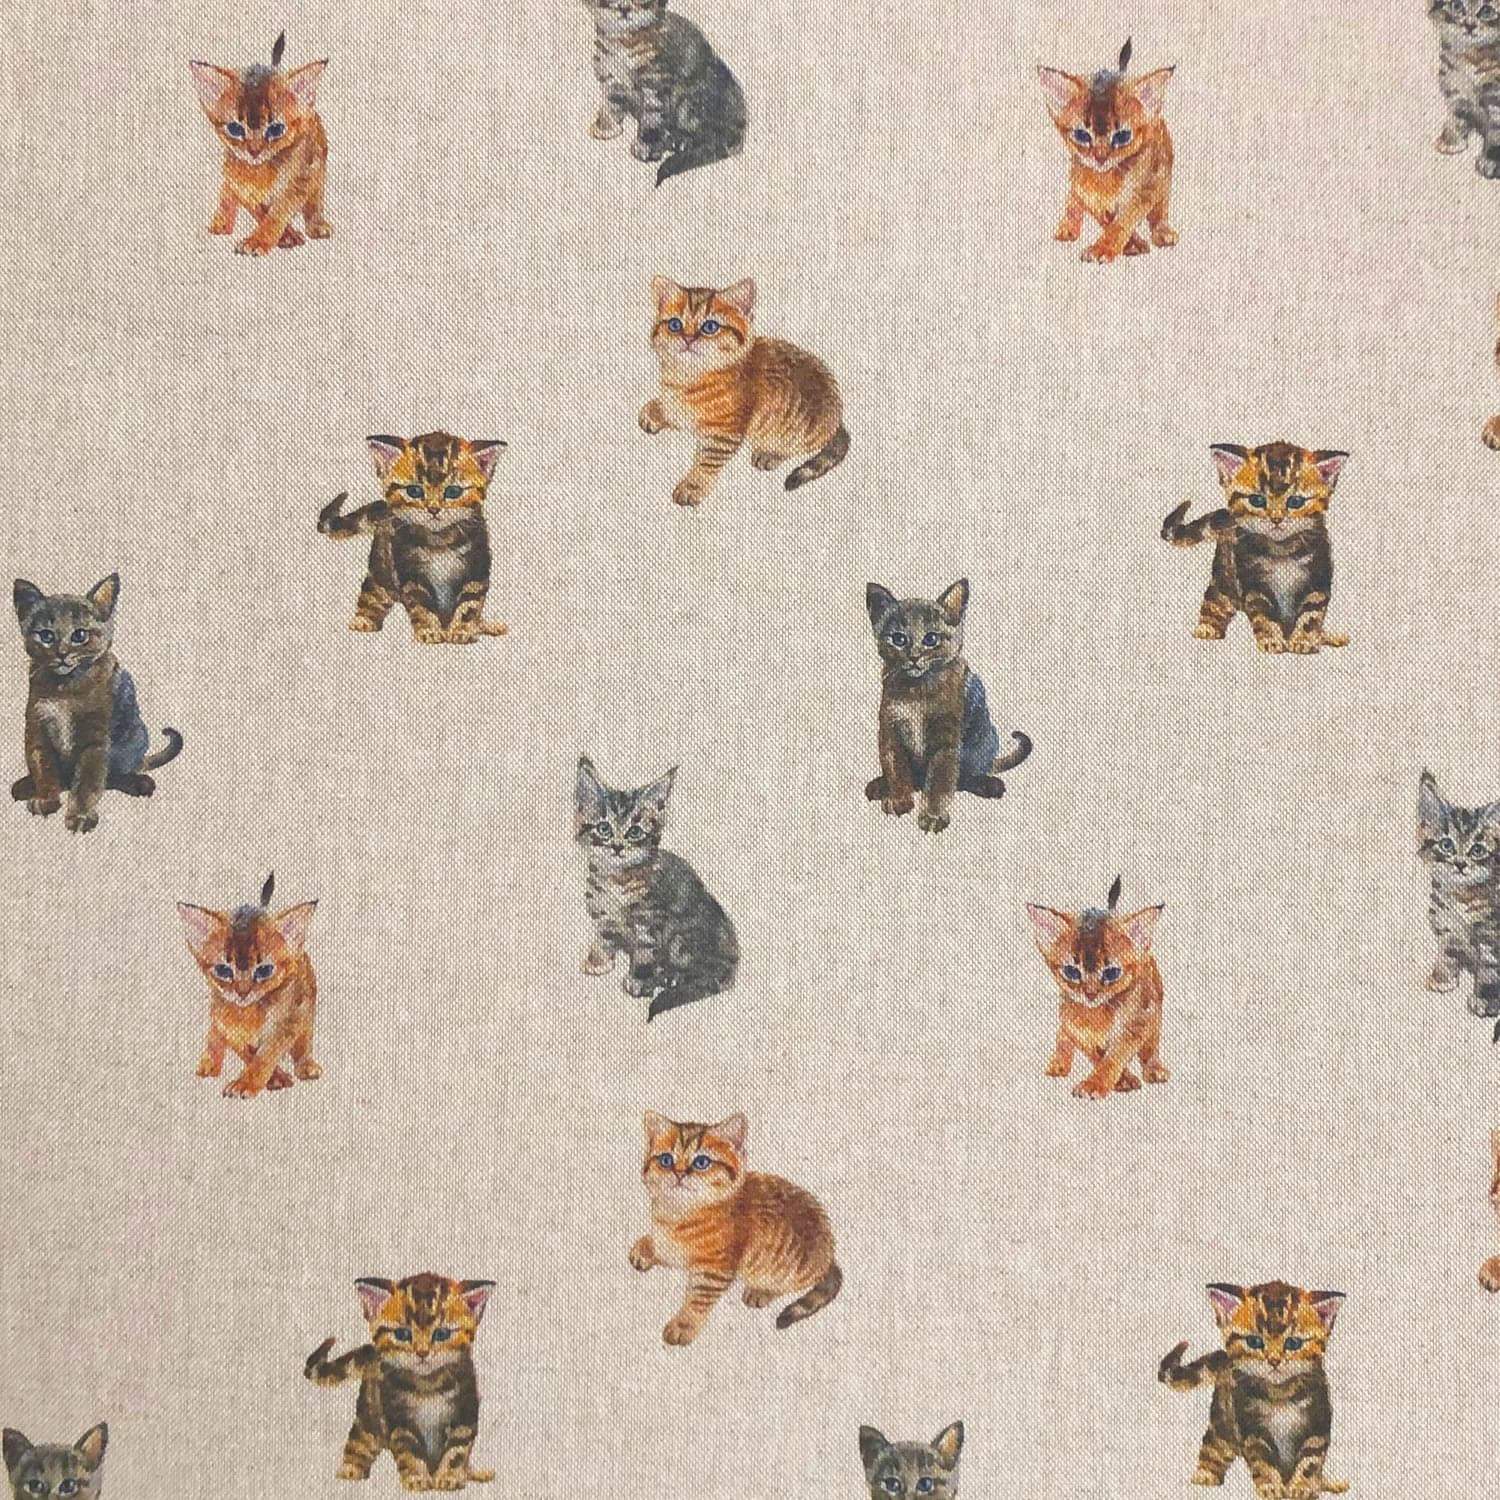 Watercolour kitten fabric on linen - super cute cat fabric perfect for crafting and quilting 